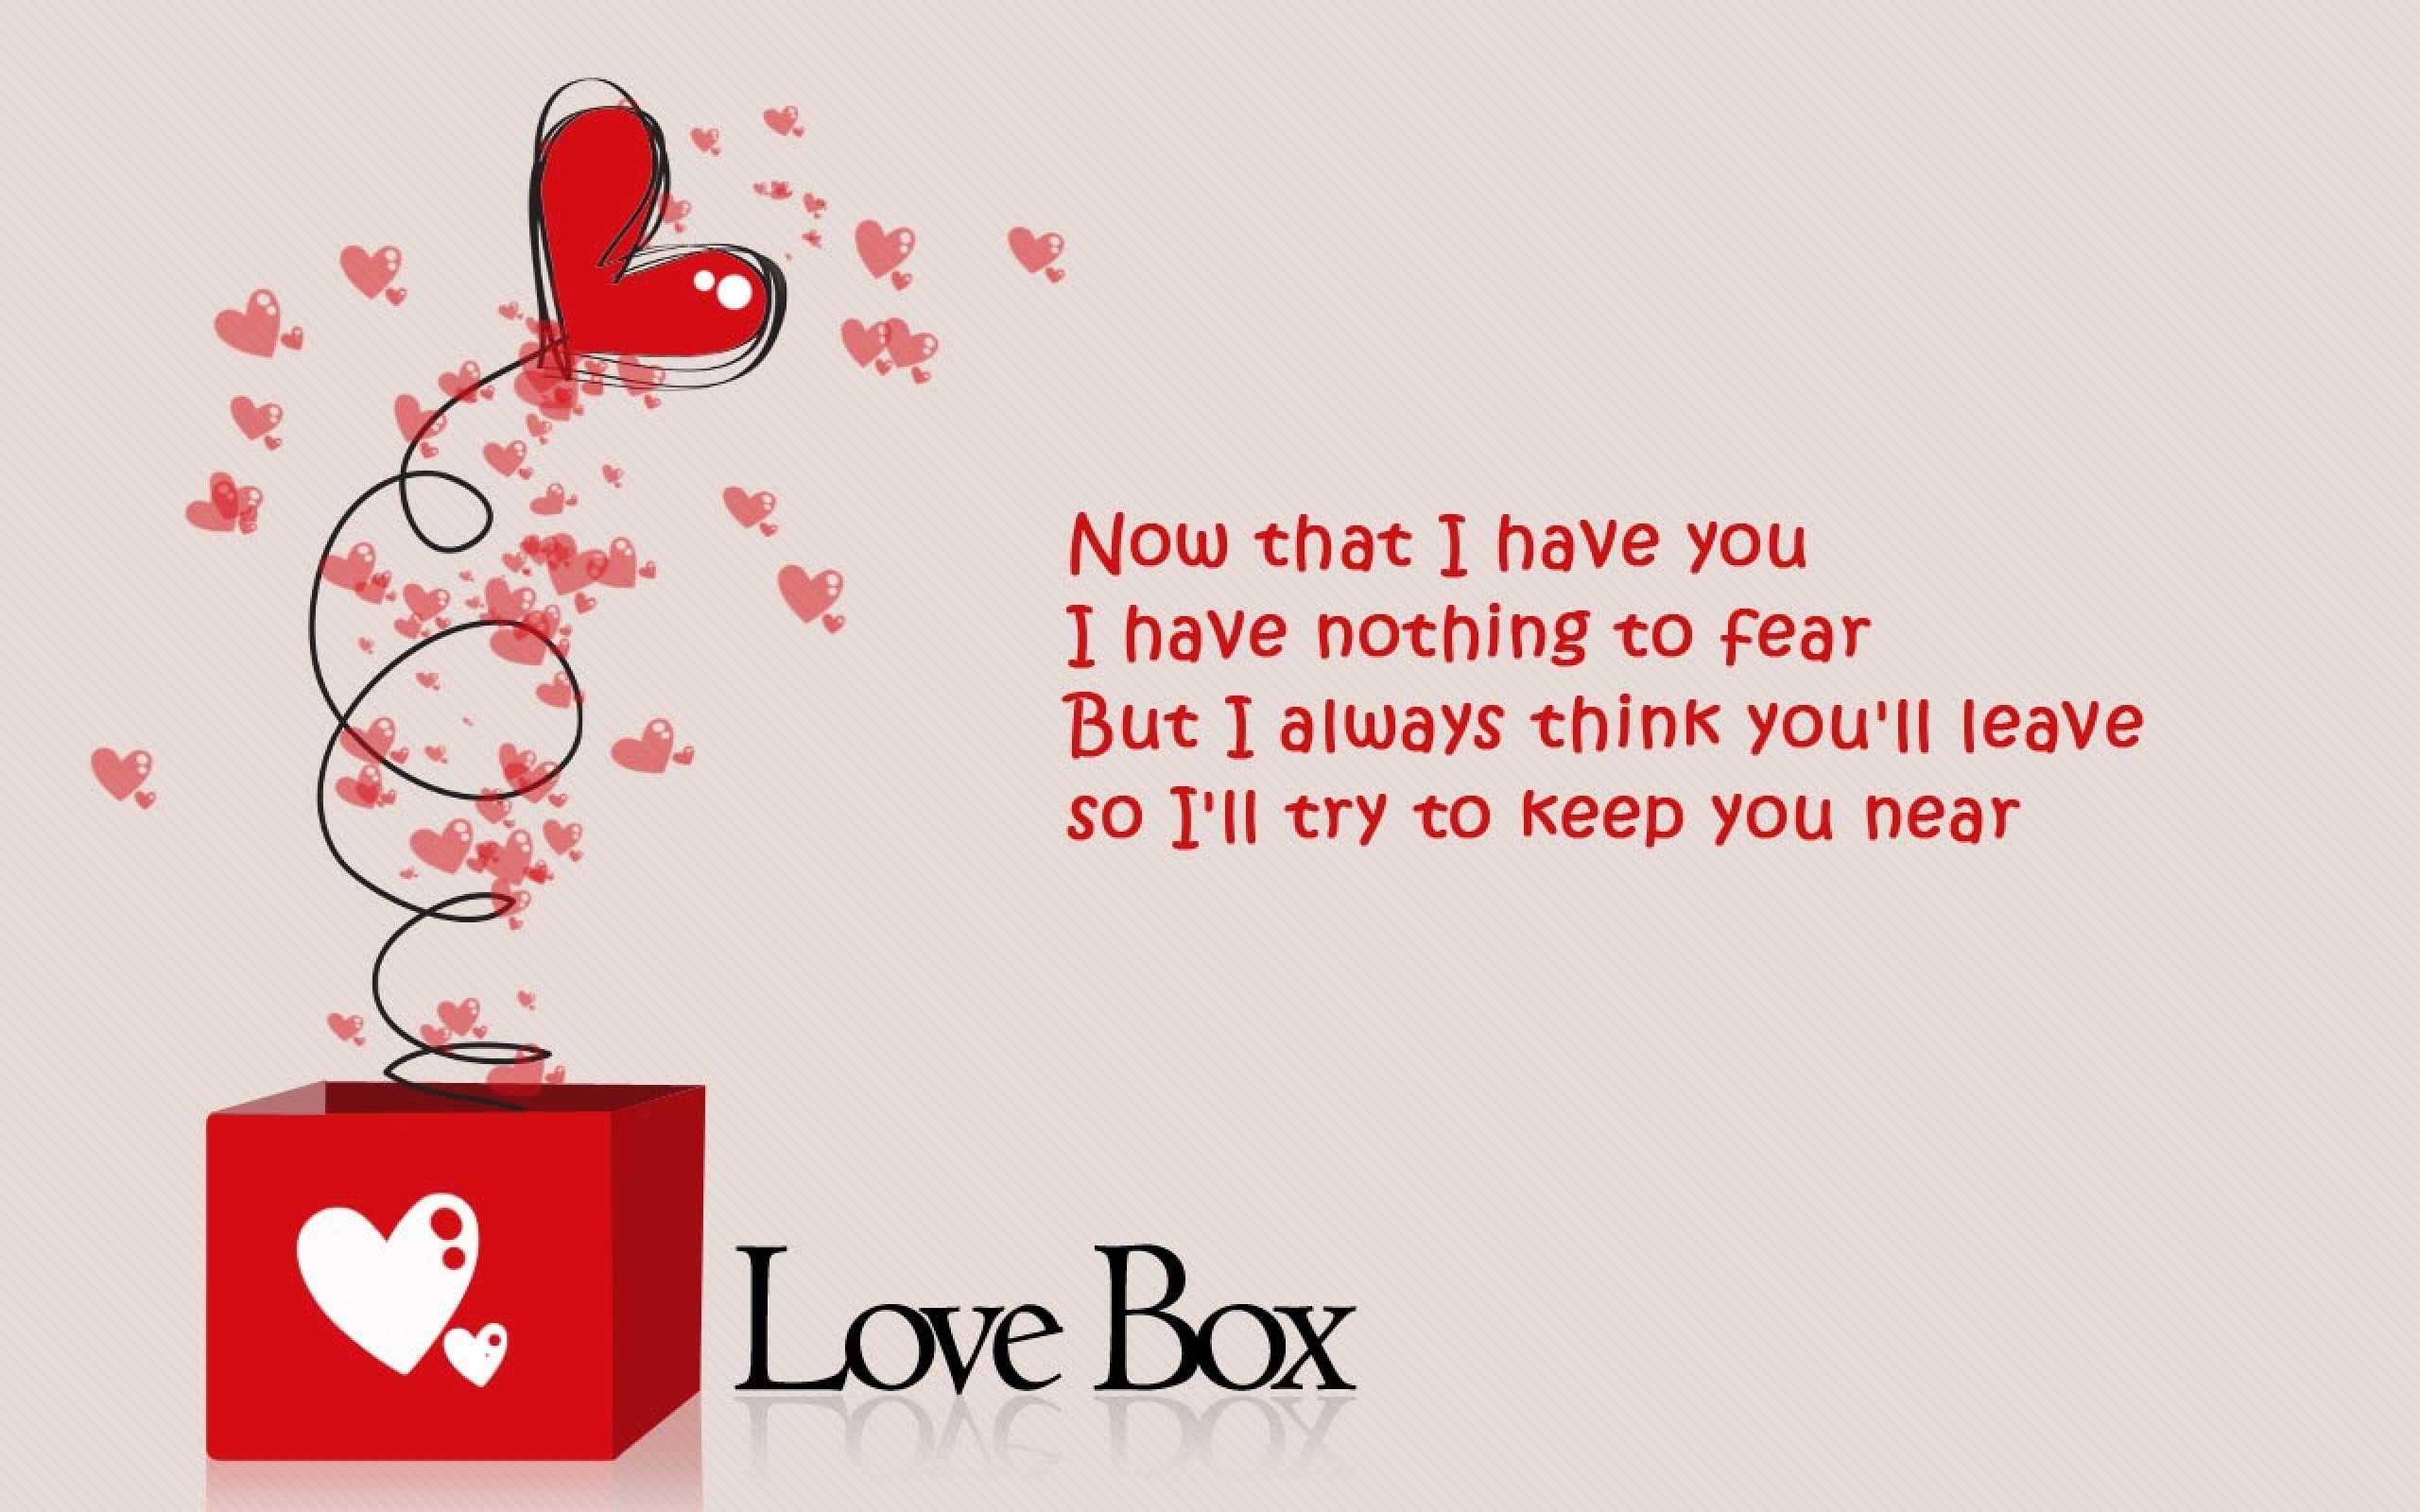 Valentines Day Poems Wallpapers - Wallpaper Cave